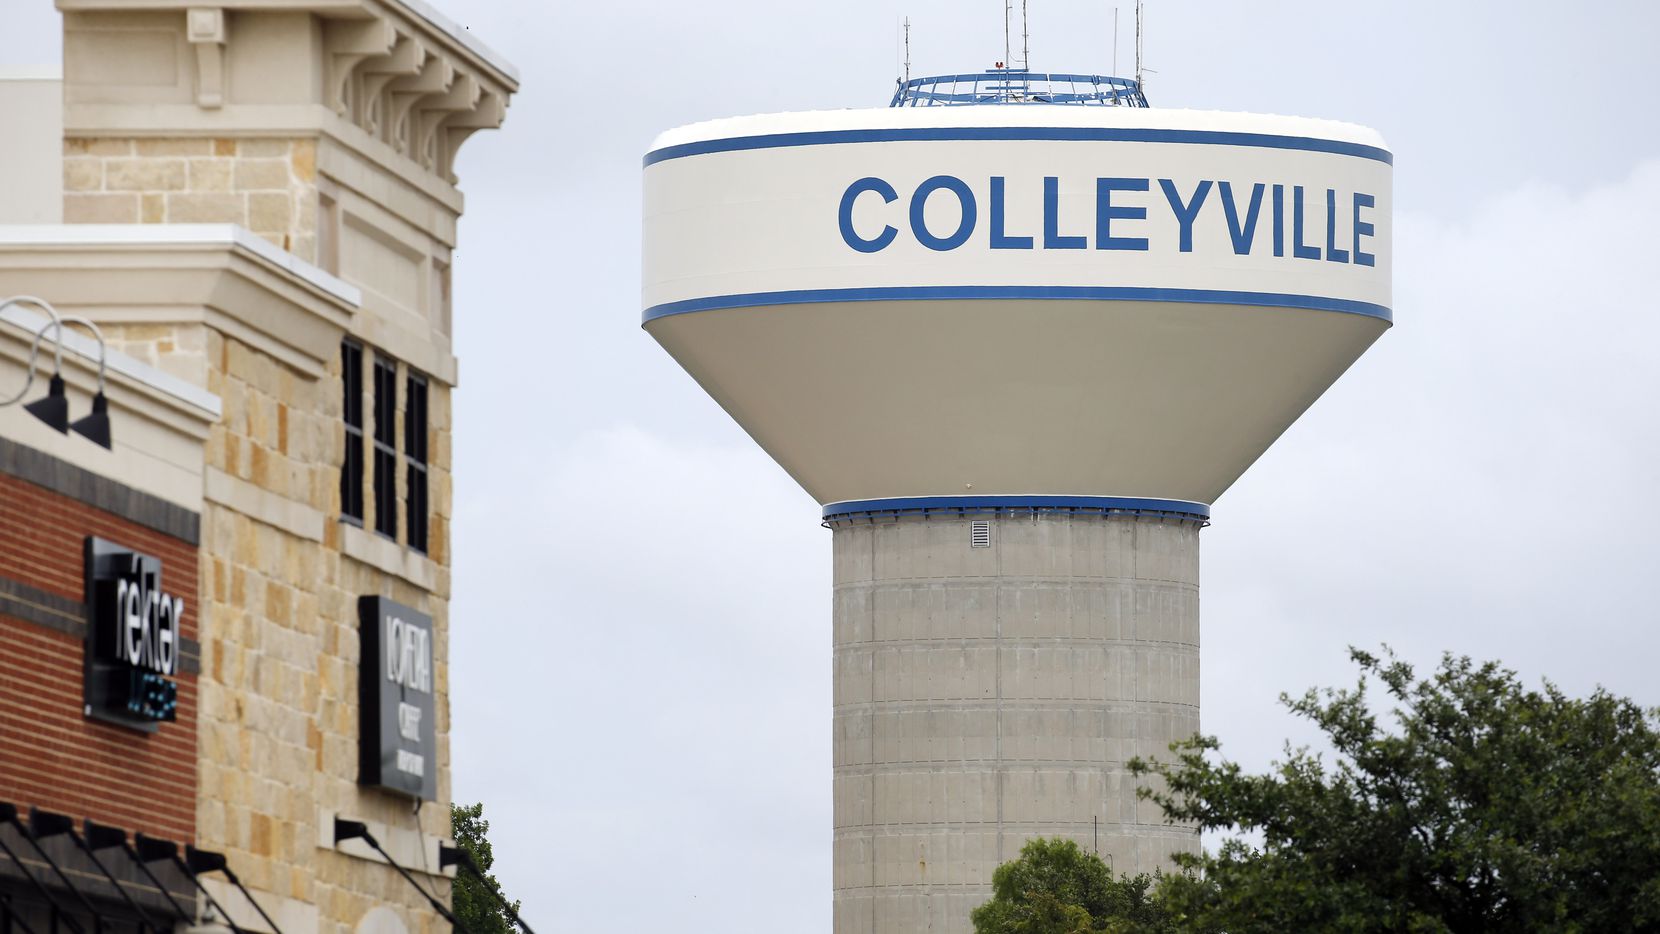 A Colleyville water tower is pictured near a shopping center in Colleyville, Texas, Tuesday,...